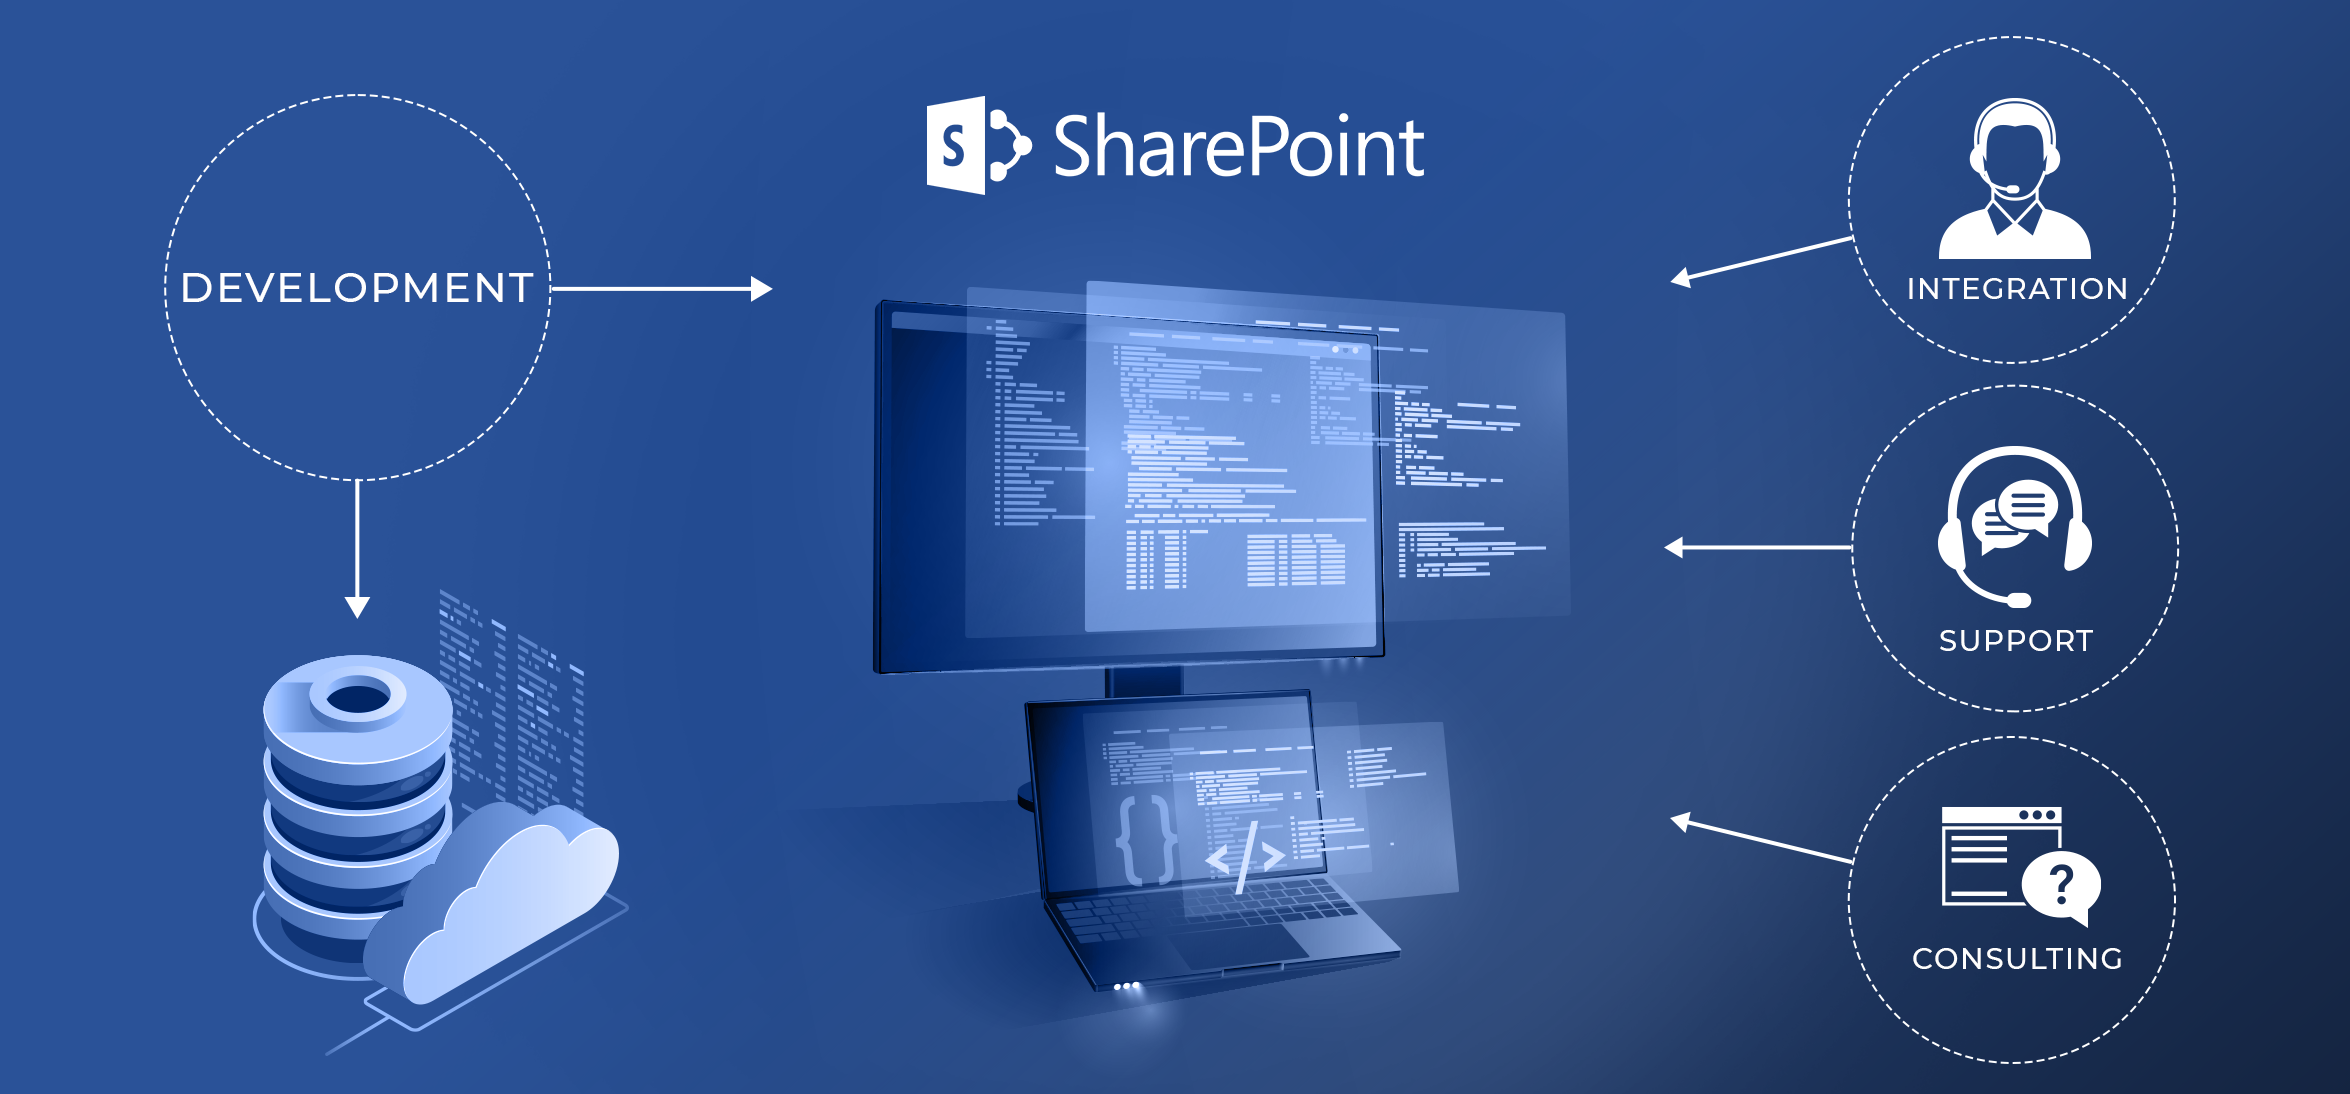 Microsoft Share Point Consult in Cliffside Park NJ, 07010